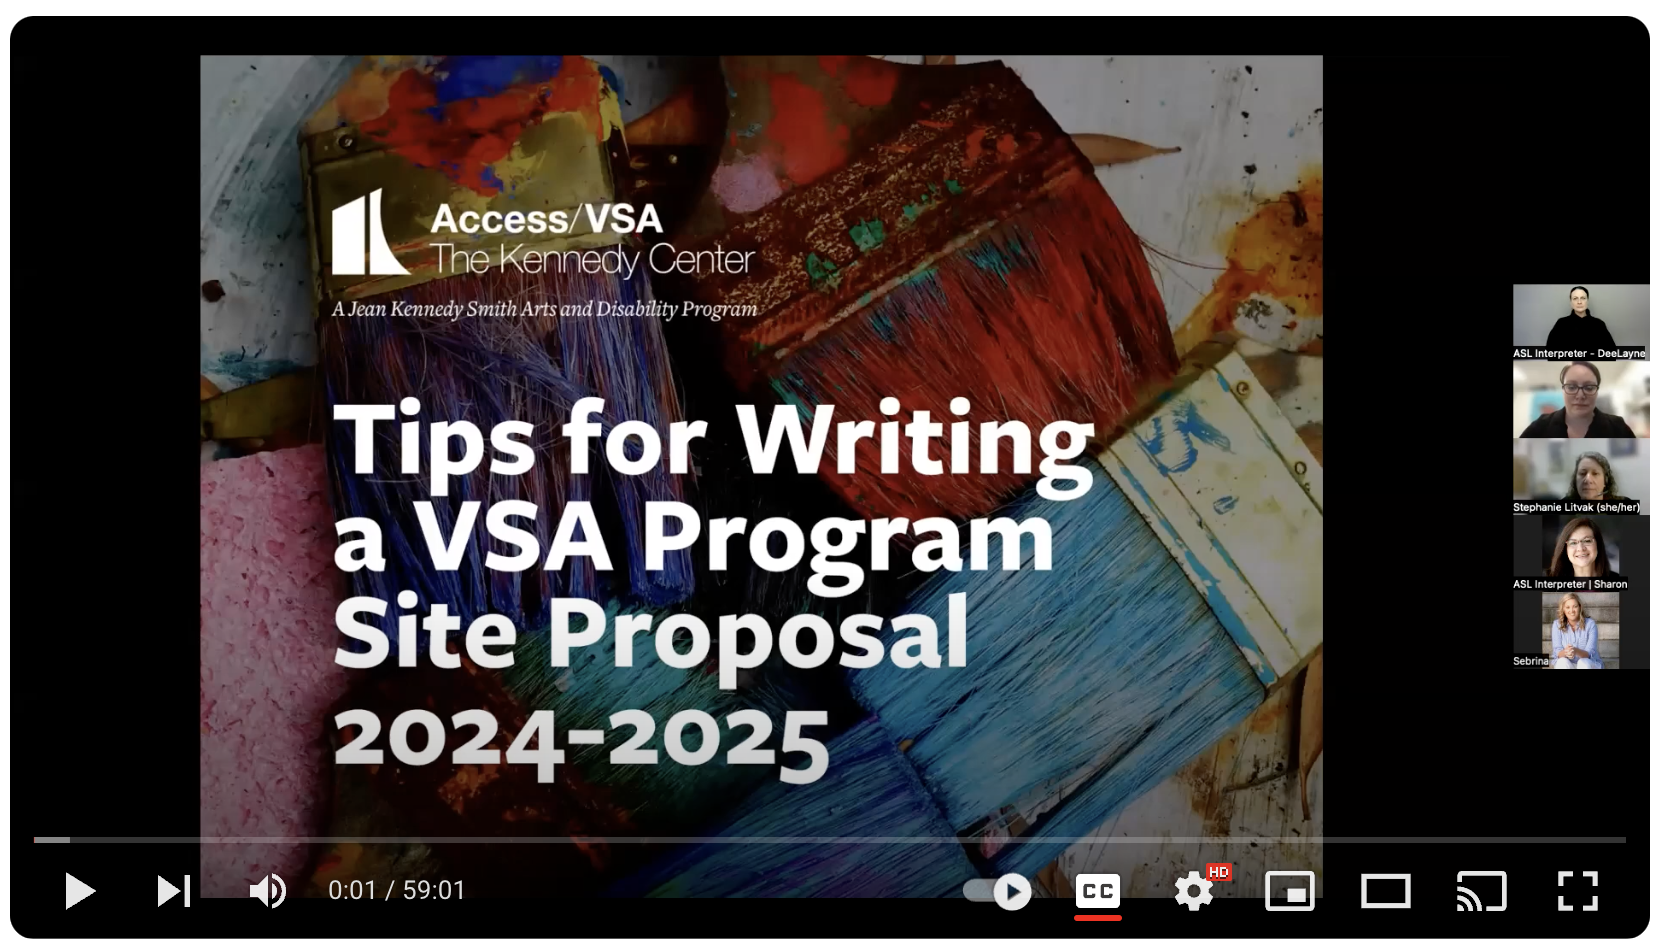 Screen shot of a You Tube video with the title Tips for Writing a VSA Program Site Proposal 2024-2025.